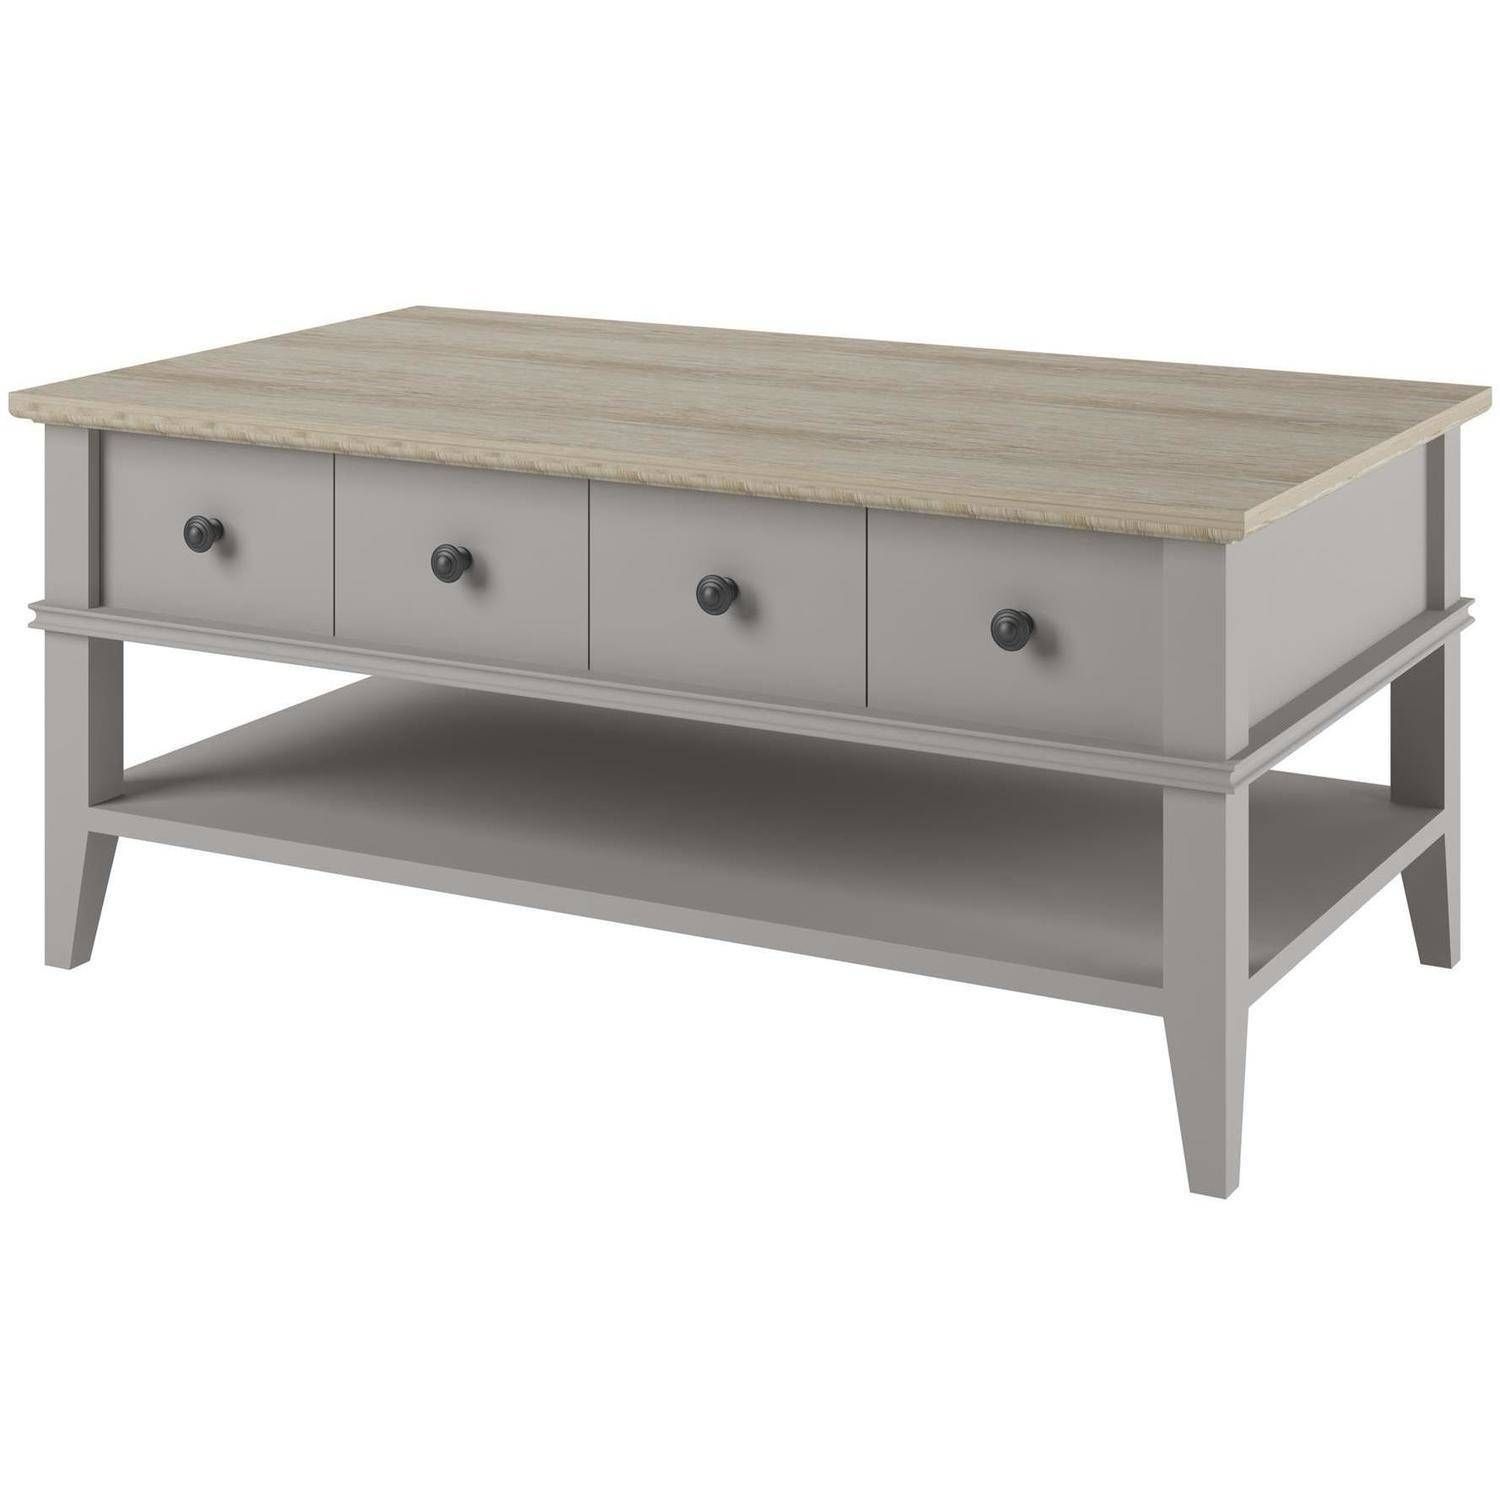 Ameriwood Home Newport Coffee Table, Light Gray/light Brown Pertaining To Gray Wood Coffee Tables (View 18 of 30)